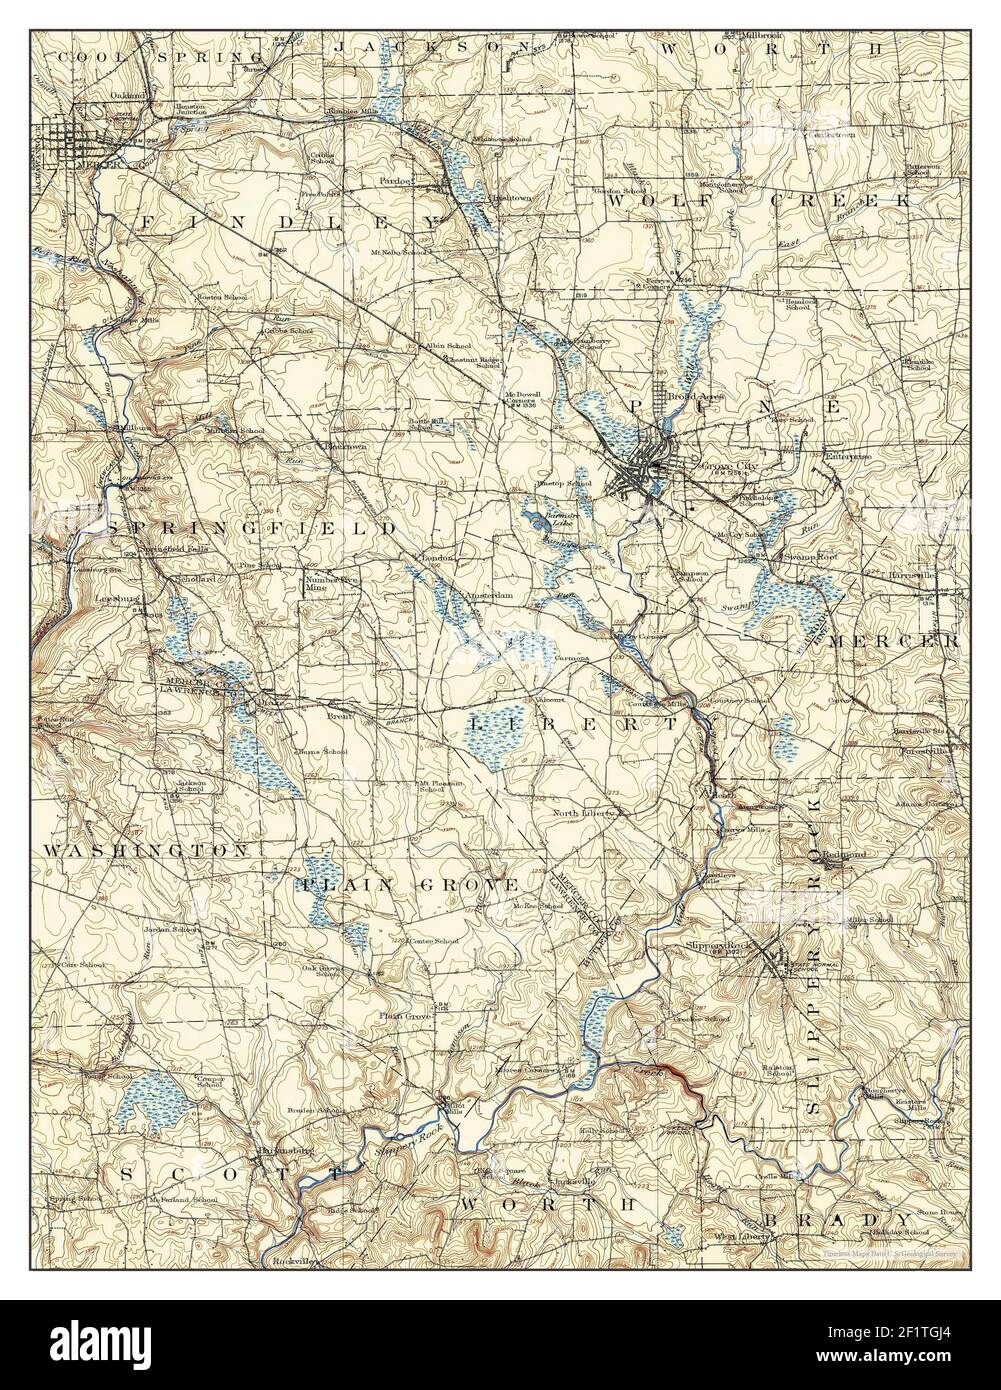 Mercer, Pennsylvania, map 1913, 1:62500, United States of America by Timeless Maps, data U.S. Geological Survey Stock Photo